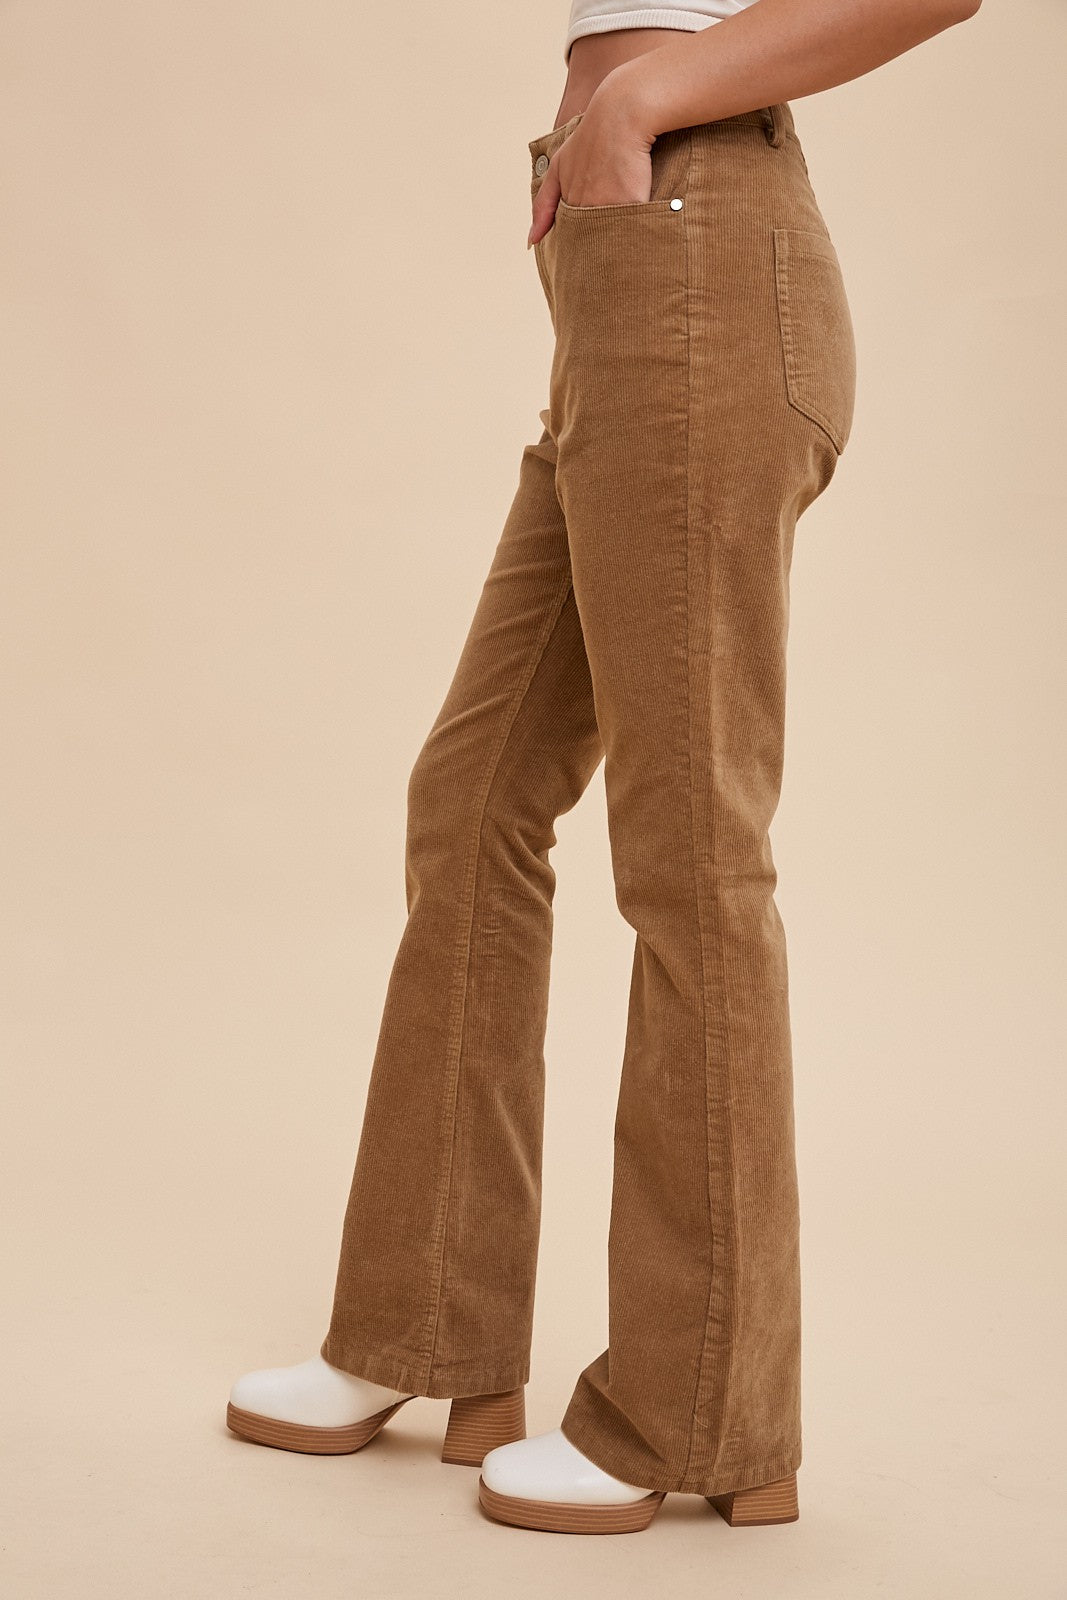 Add Some Flare Corduroy Pants